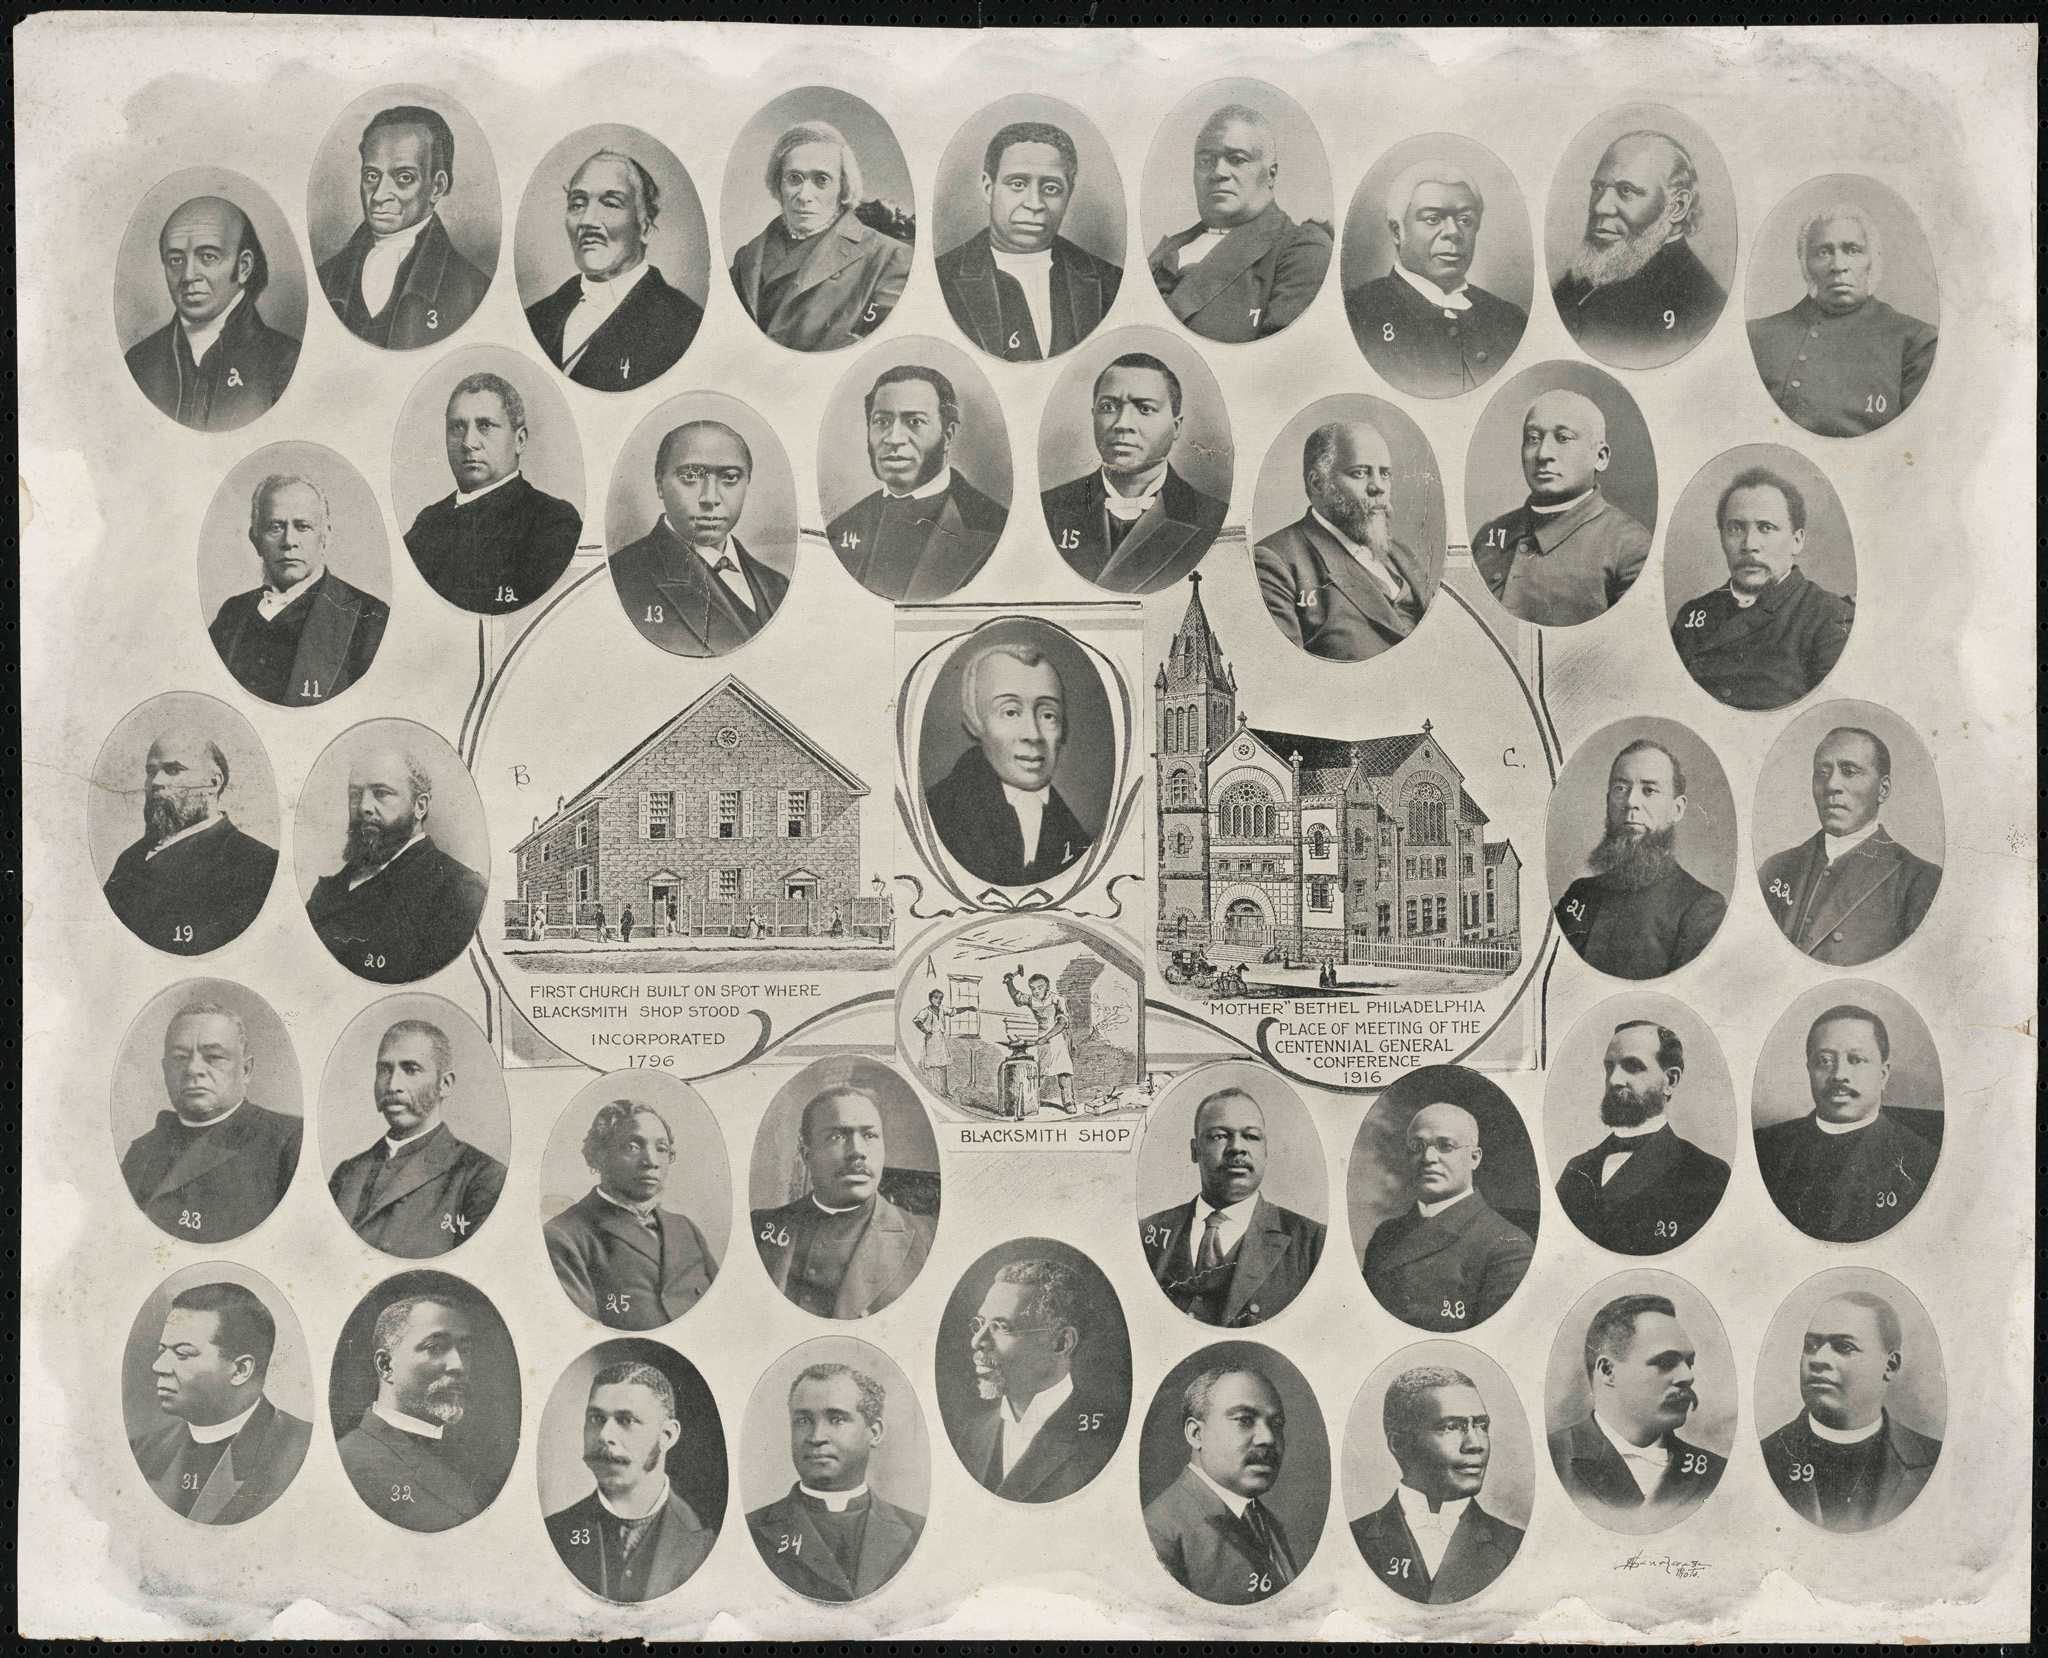 A black-and-white poster with a pictorial history of the ministers and bishops of the Mother Bethel A.M.E. Church in Philadelphia, in celebration of the African Methodist Episcopal Church centennial celebration in 1916. At center is an oval portrait of founder Bishop Richard Allen. To the left of Allen is a depiction of a two-story blacksmith shop with the caption [FIRST CHURCH BUILT ON SPOT WHERE BLACKSMITH SHOP STOOD / INCORPORATED / 1796]. Beneath Allen's portrait is an interior scene of the two men laboring in the blacksmith shop with the caption [BLACKSMITH SHOP] and to the right is an illustration of the three-story masonry church building with the caption ["MOTHER" BETHEL PHILADELPHIA / PLACE OF MEETING OF THE / CENTENNIAL GENERAL / CONFERENCE / 1916]. Surrounding the center scenes is a montage of thirty-eight (38) numbered, oval portraits of church bishops and ministers from Allen to William Beckett, minister in 1916.